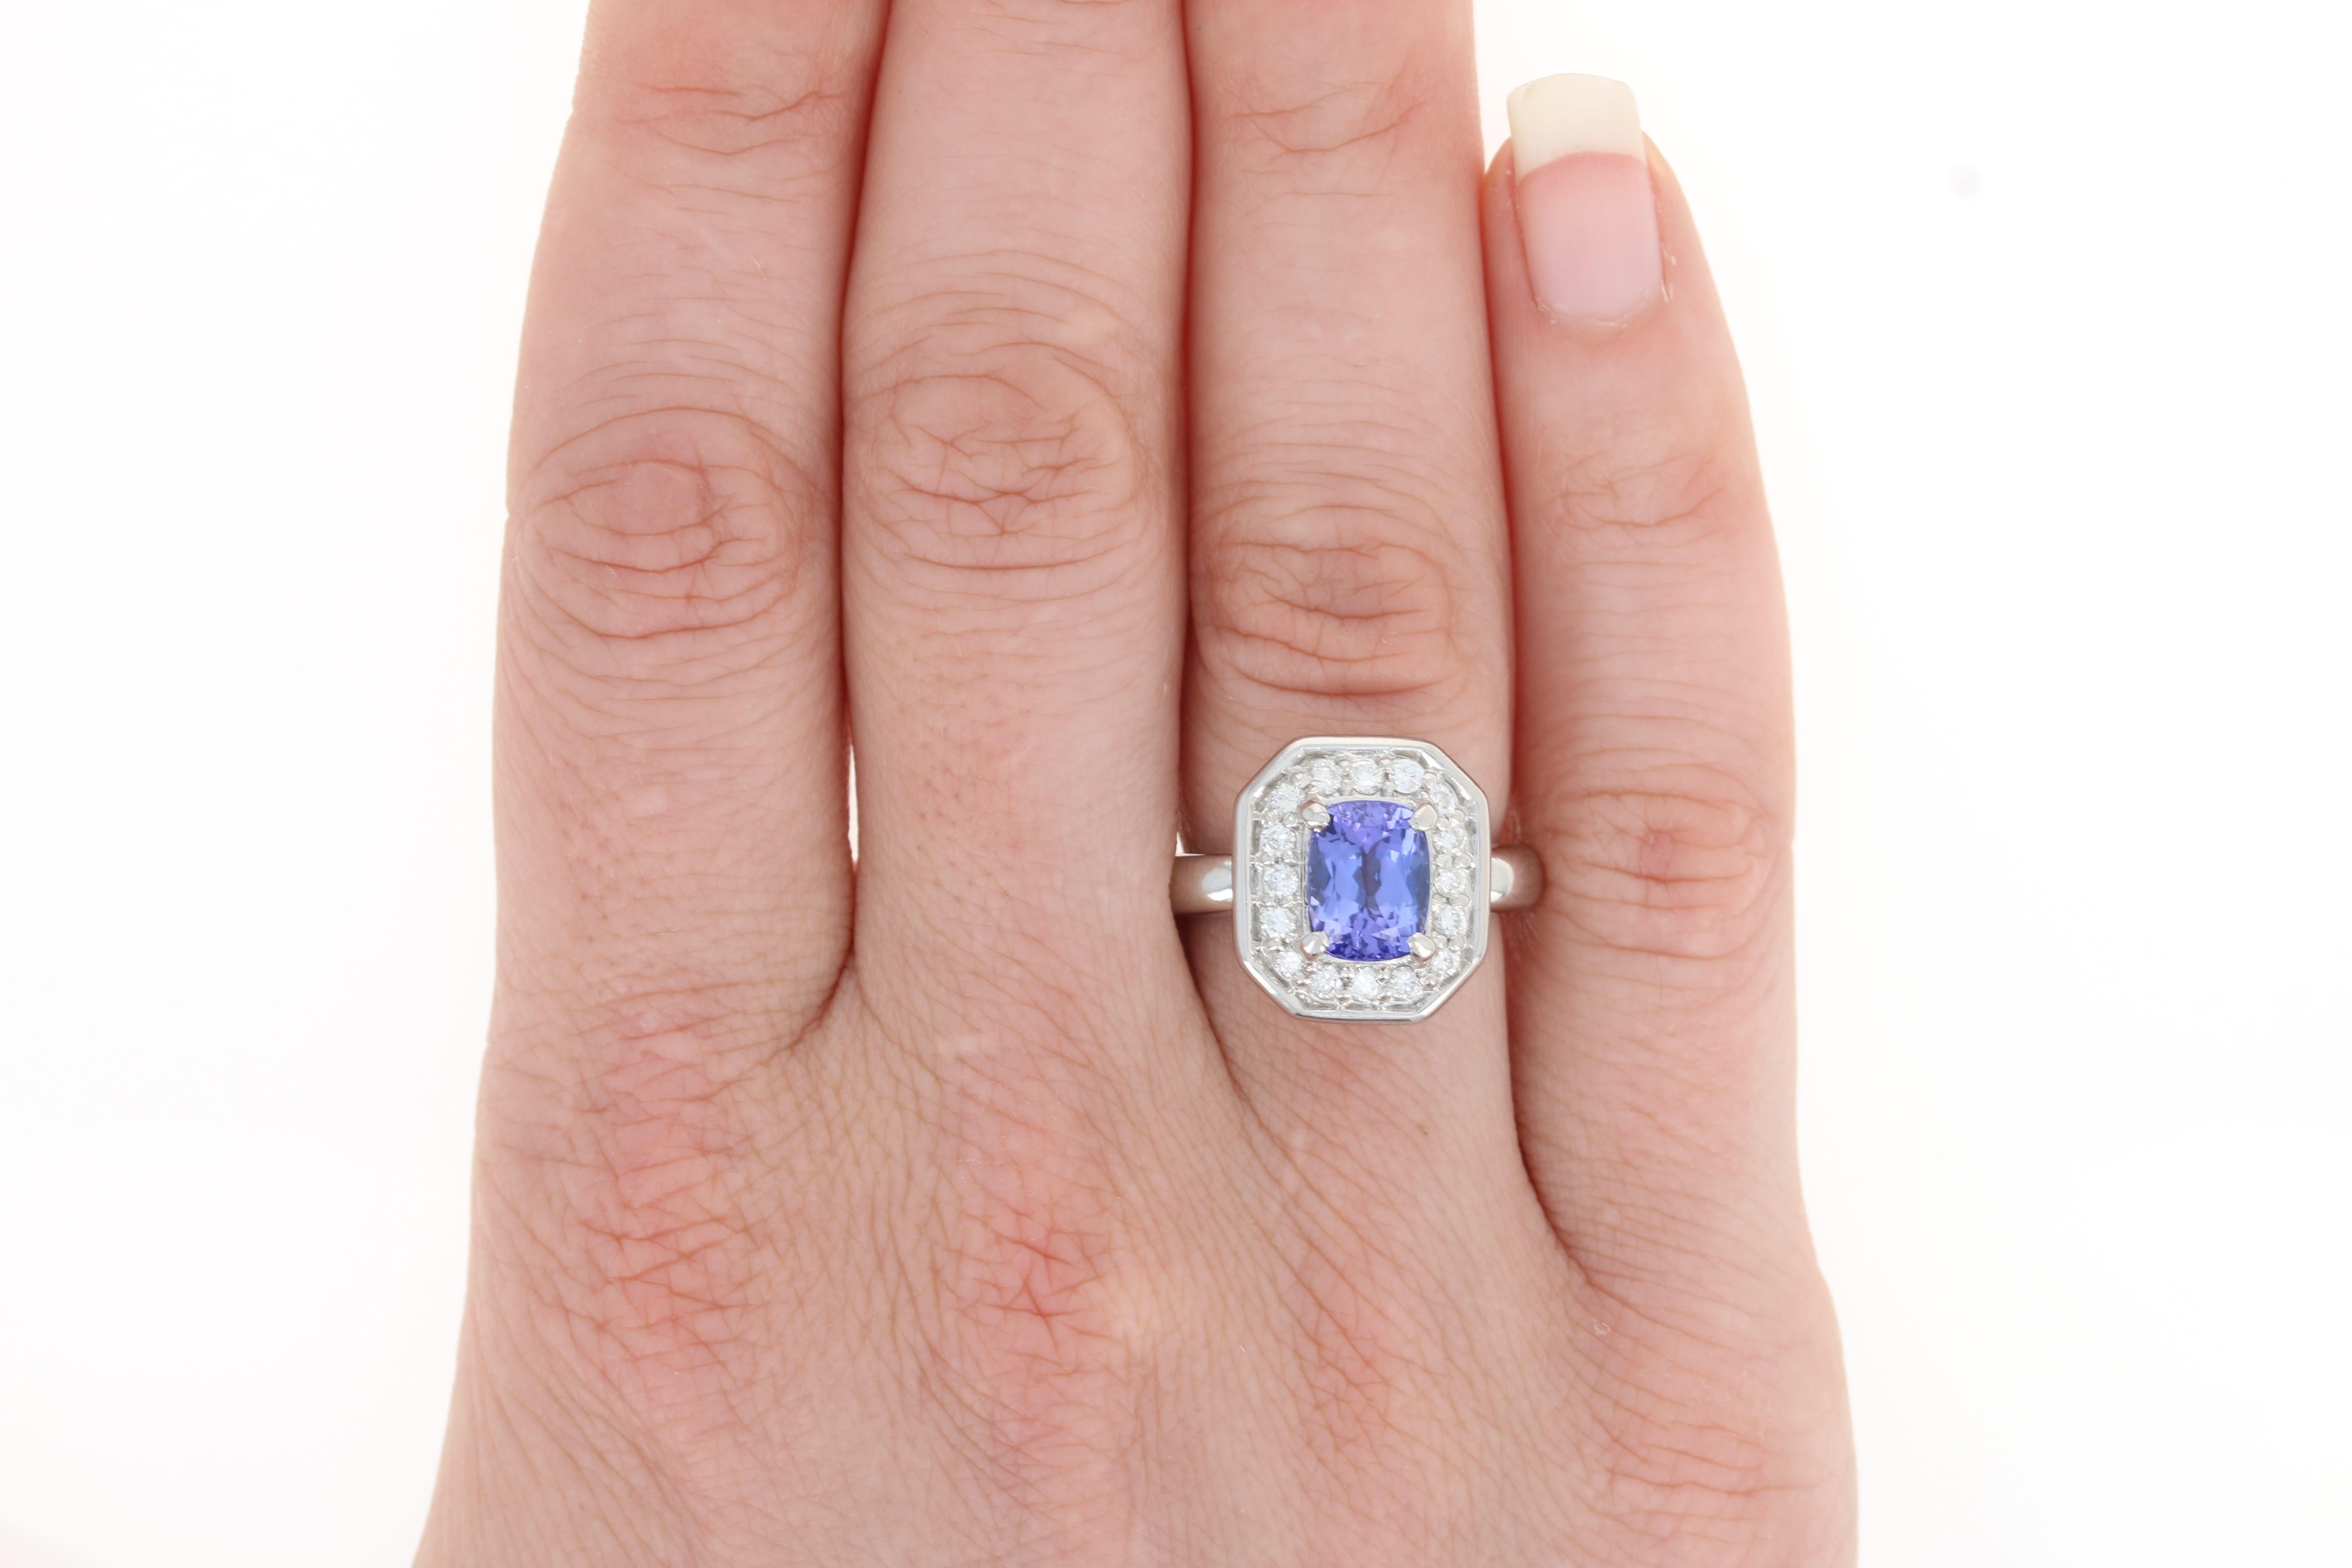 Give your December birthday girl the gift of sparkling gems! Held in an exquisite 850 platinum mount, this ring hosts a silky purple tanzanite framed by a luminous diamond halo. 

This ring is a size 5 3/4 - 6.

Metal Content: Guaranteed 850